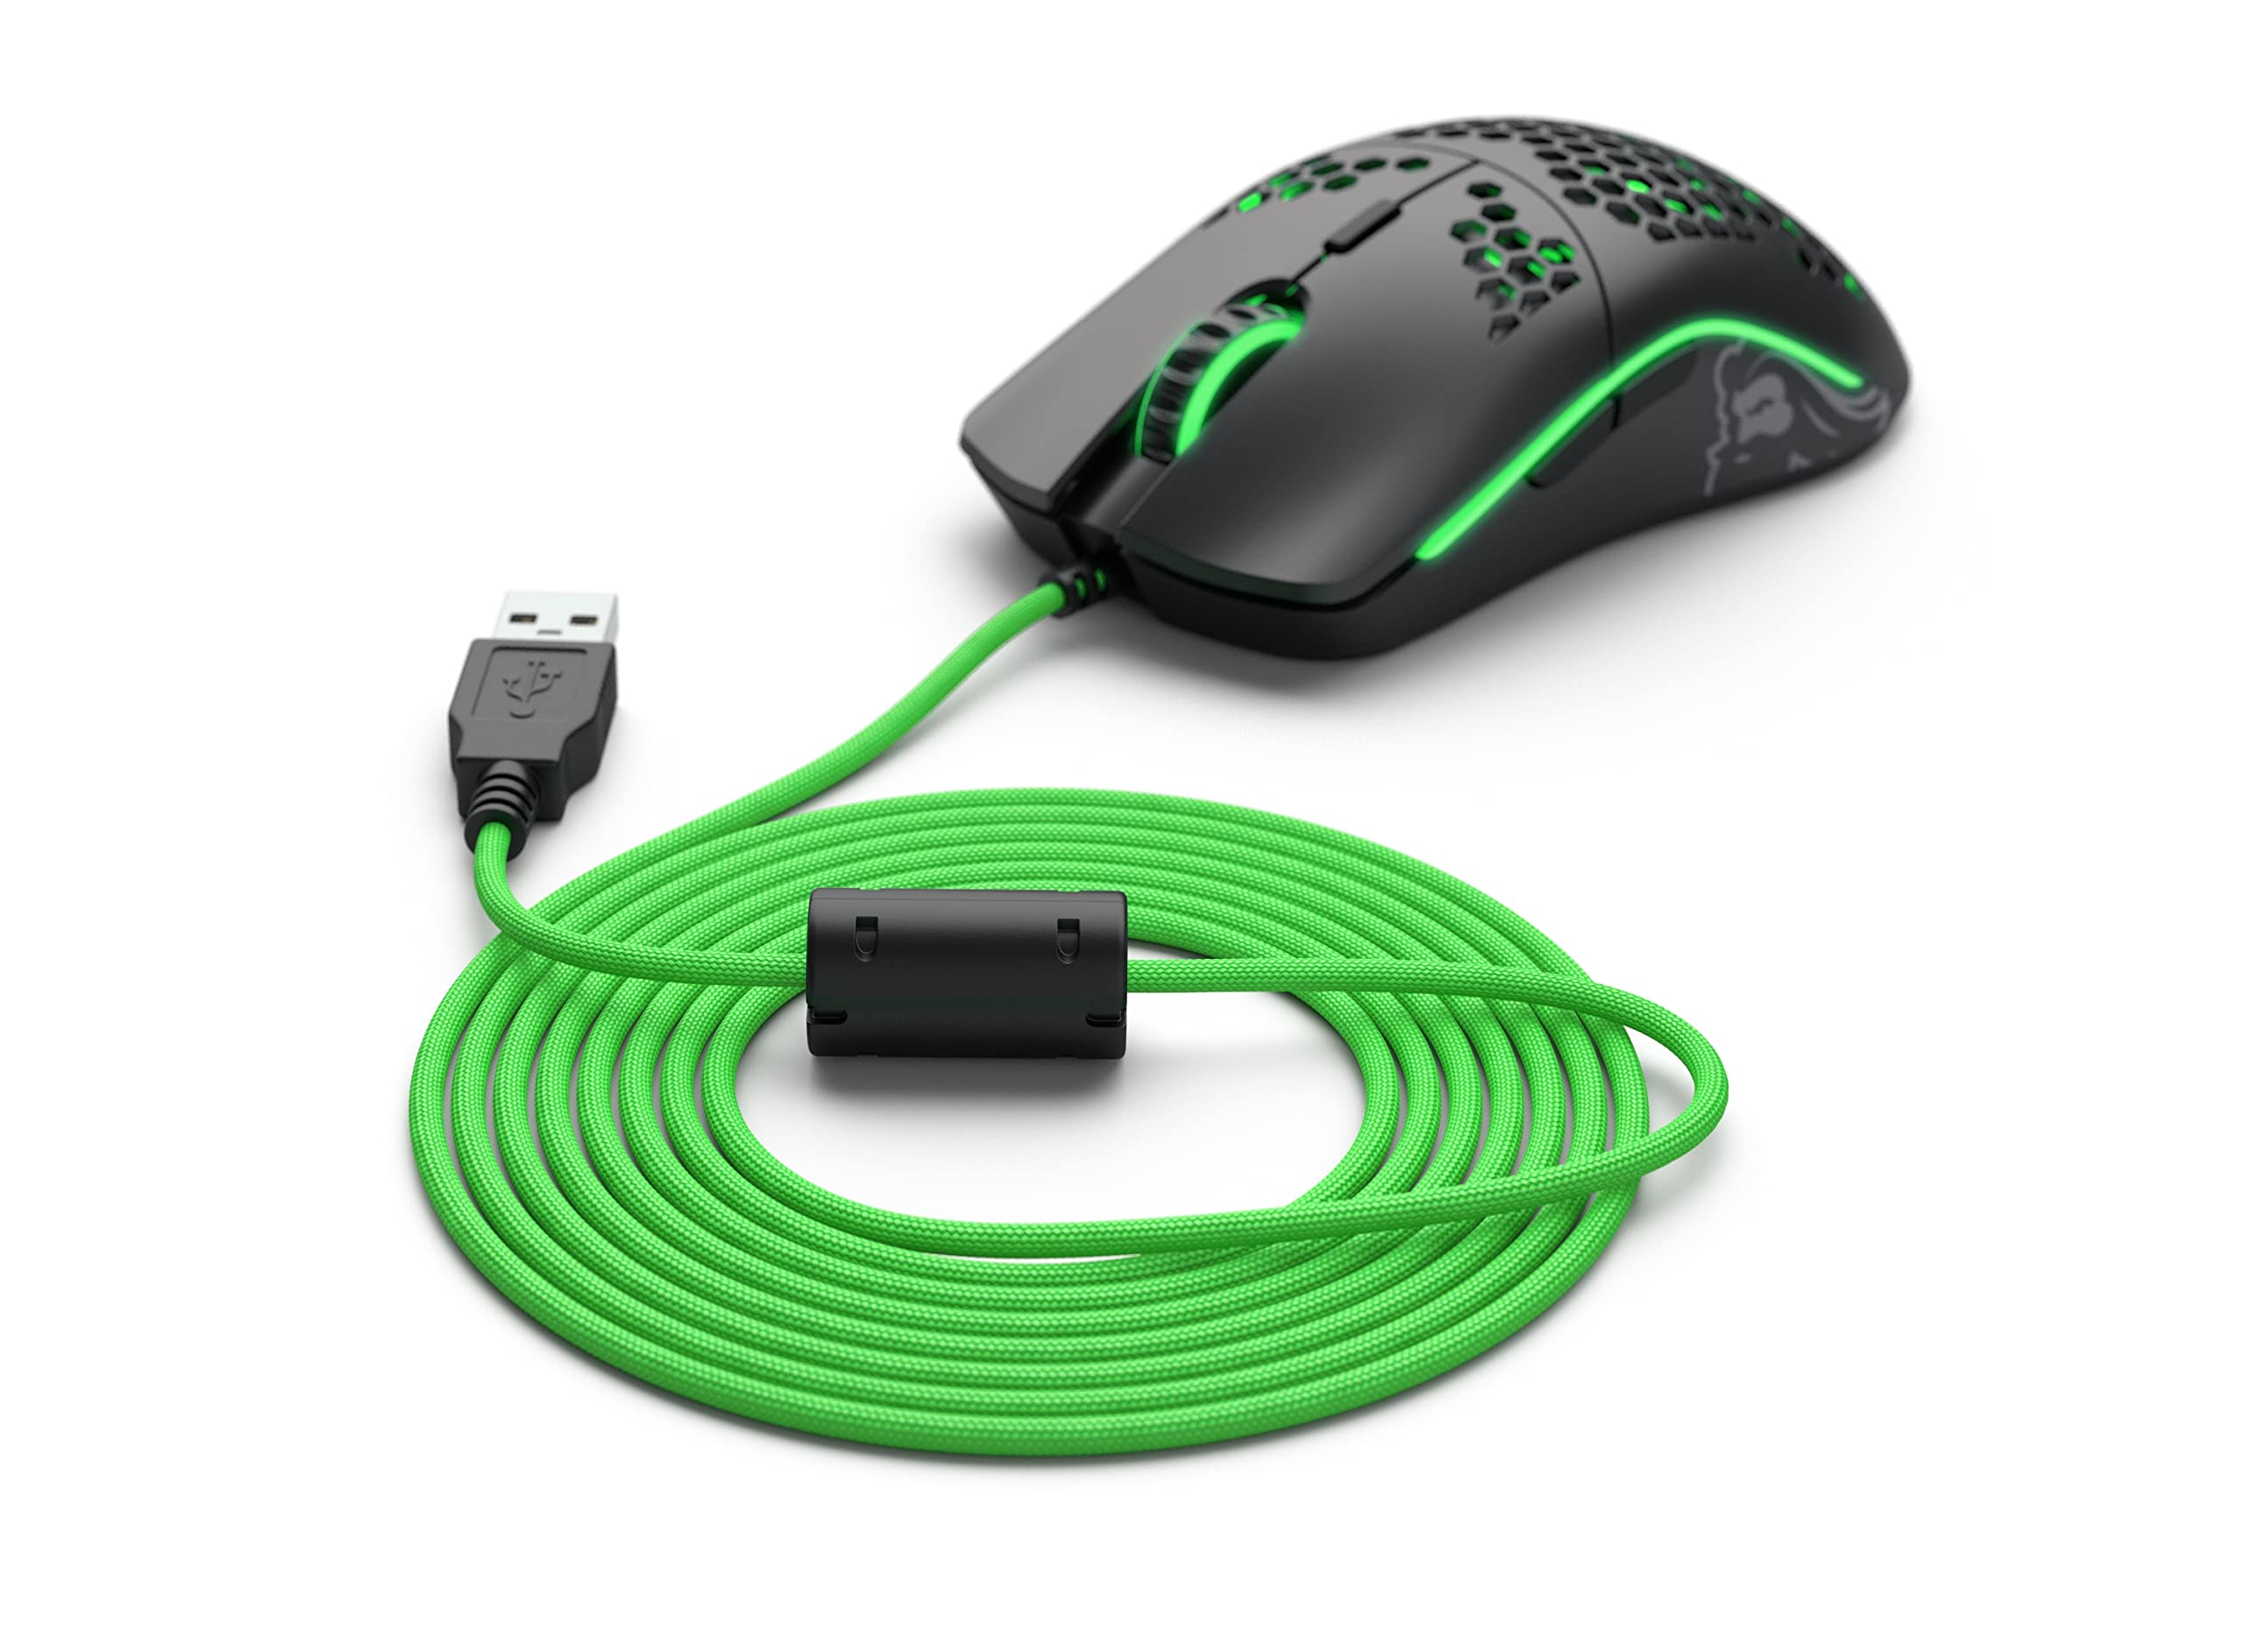 Glorious Ascended Cable (Green) - Flexible Lightweight Paracord - Gaming Mouse Replacement Cable Repair Accessory (Mouse not Included)